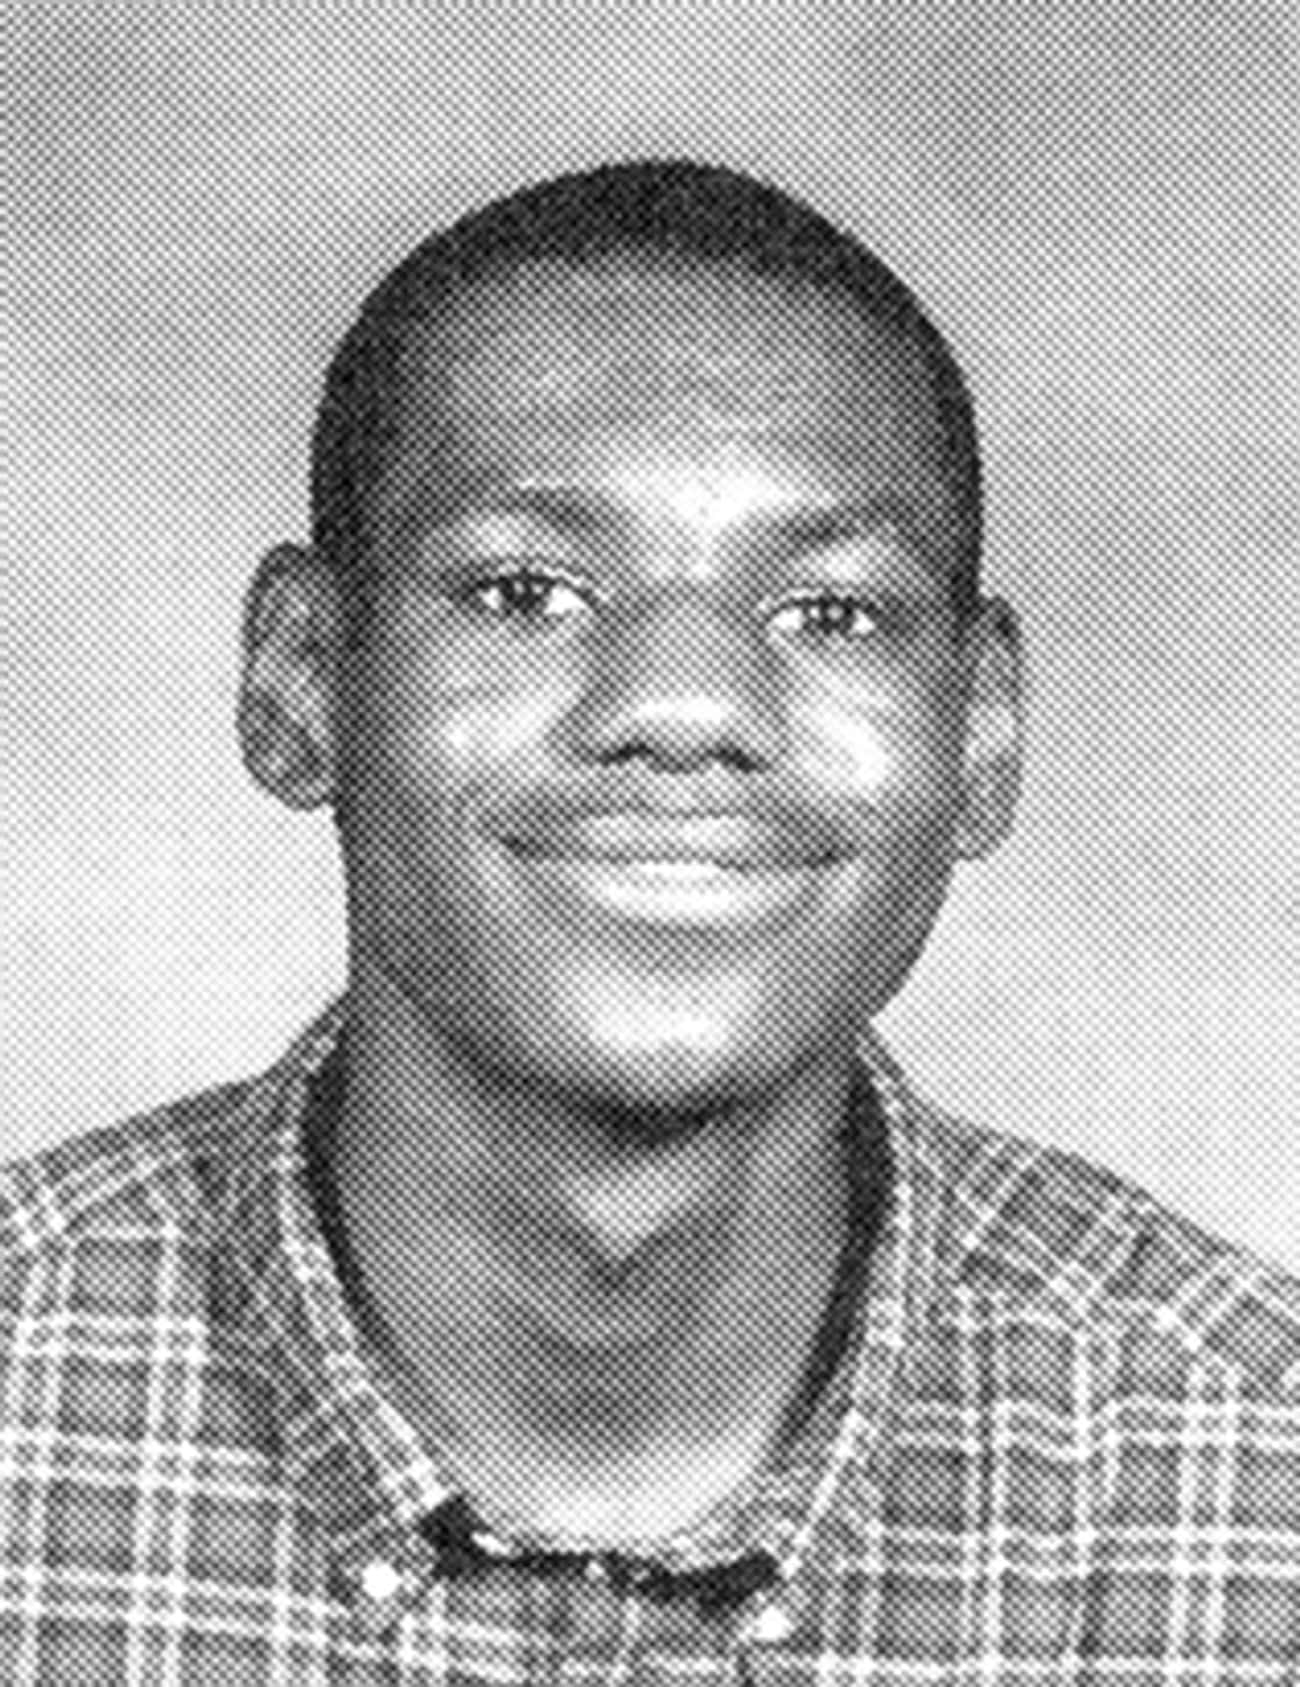 Young LeBron James in Plaid Shirt High School Yearbook Photo